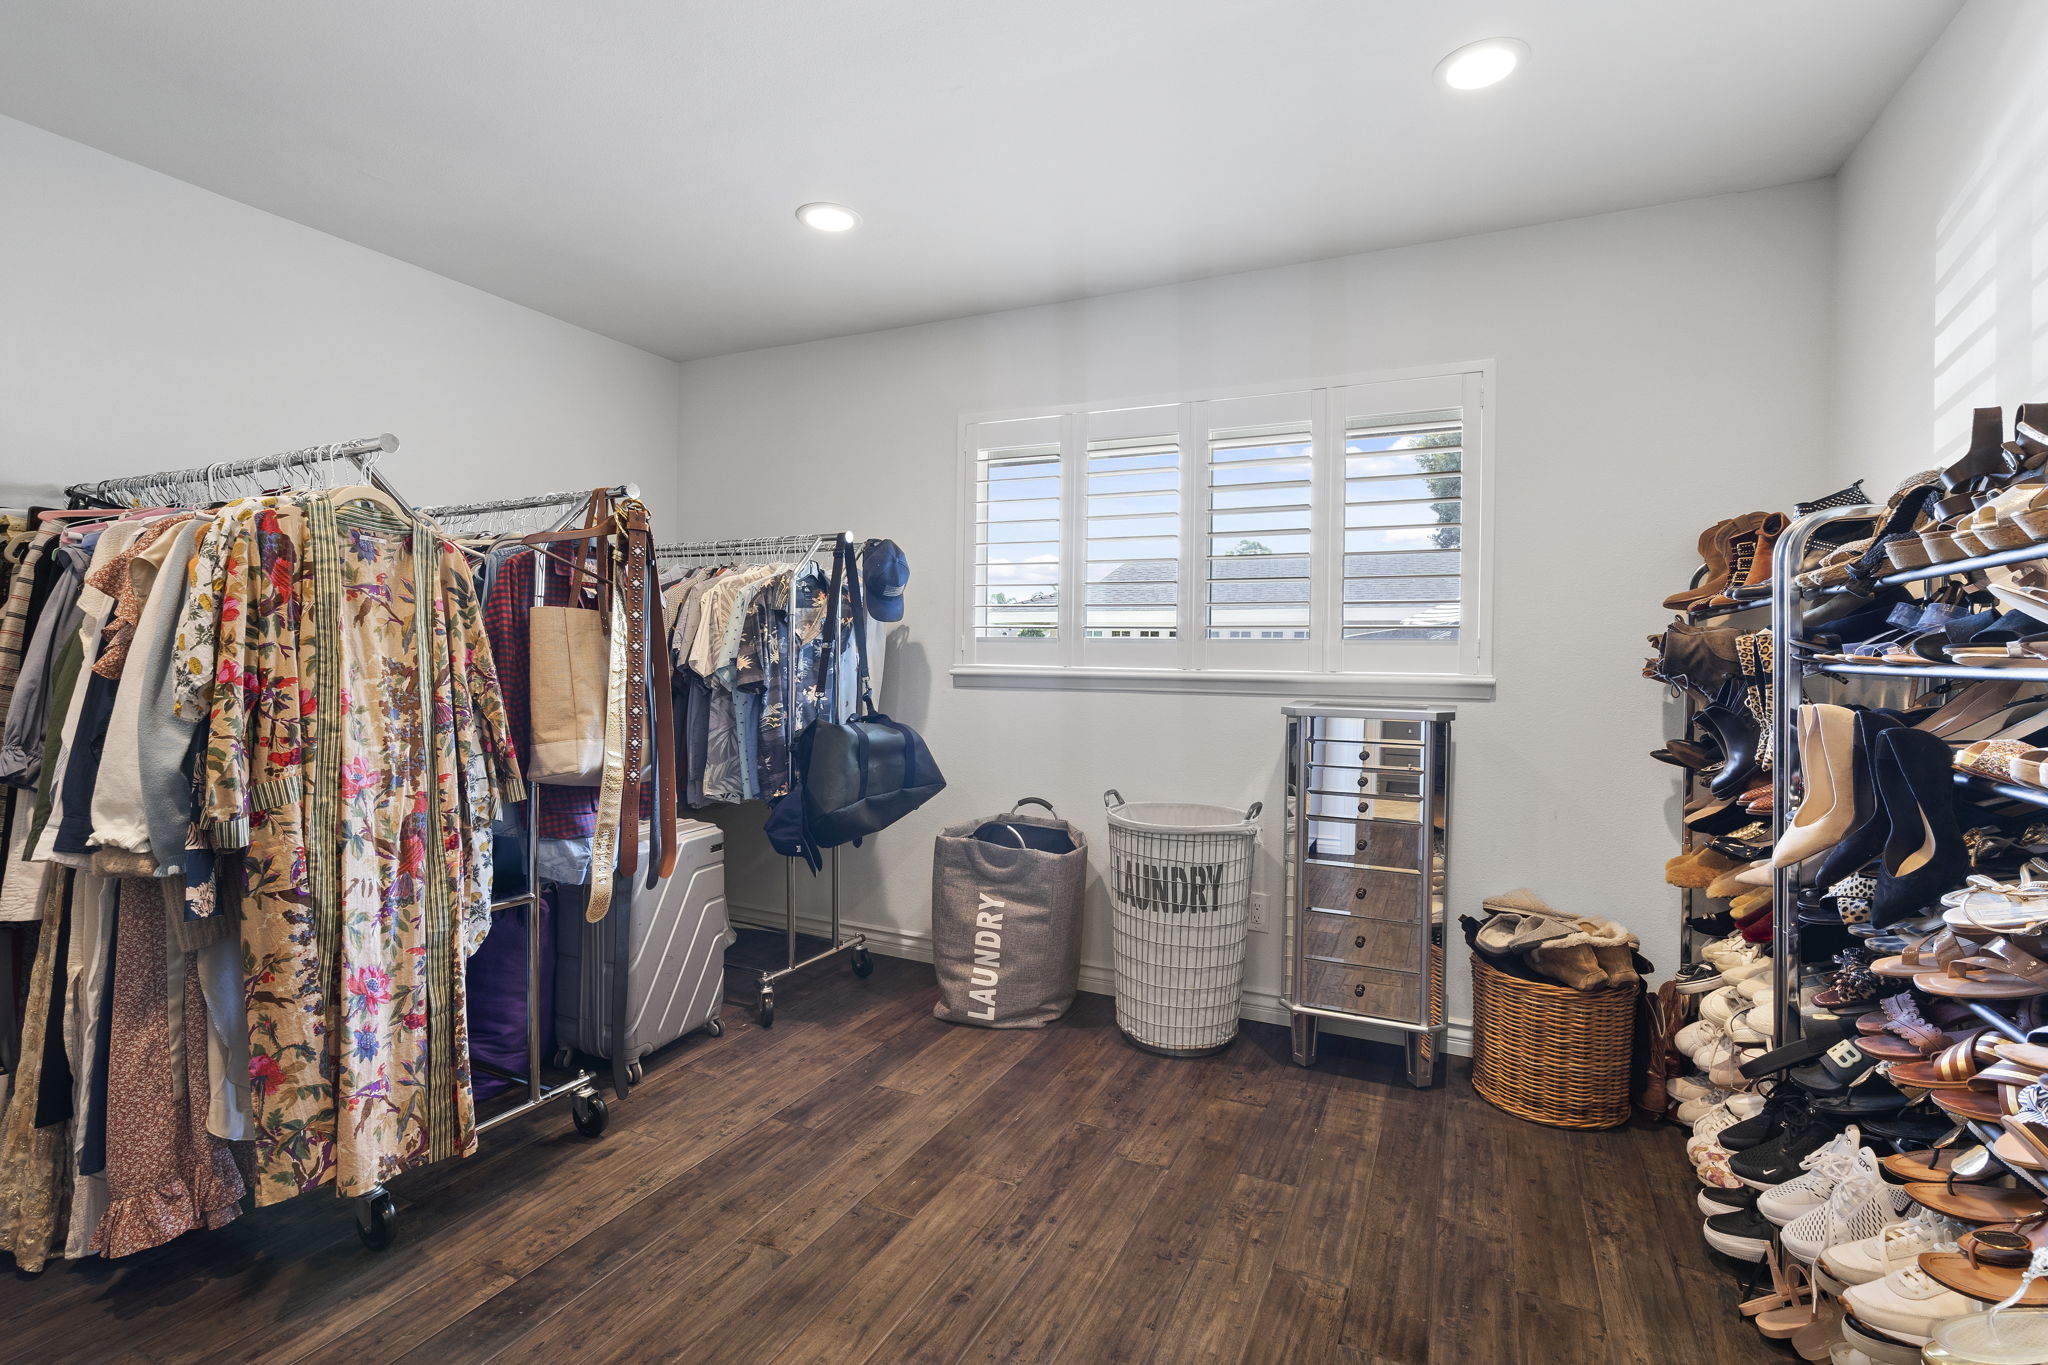 More than 110 sq feet of primary closet space